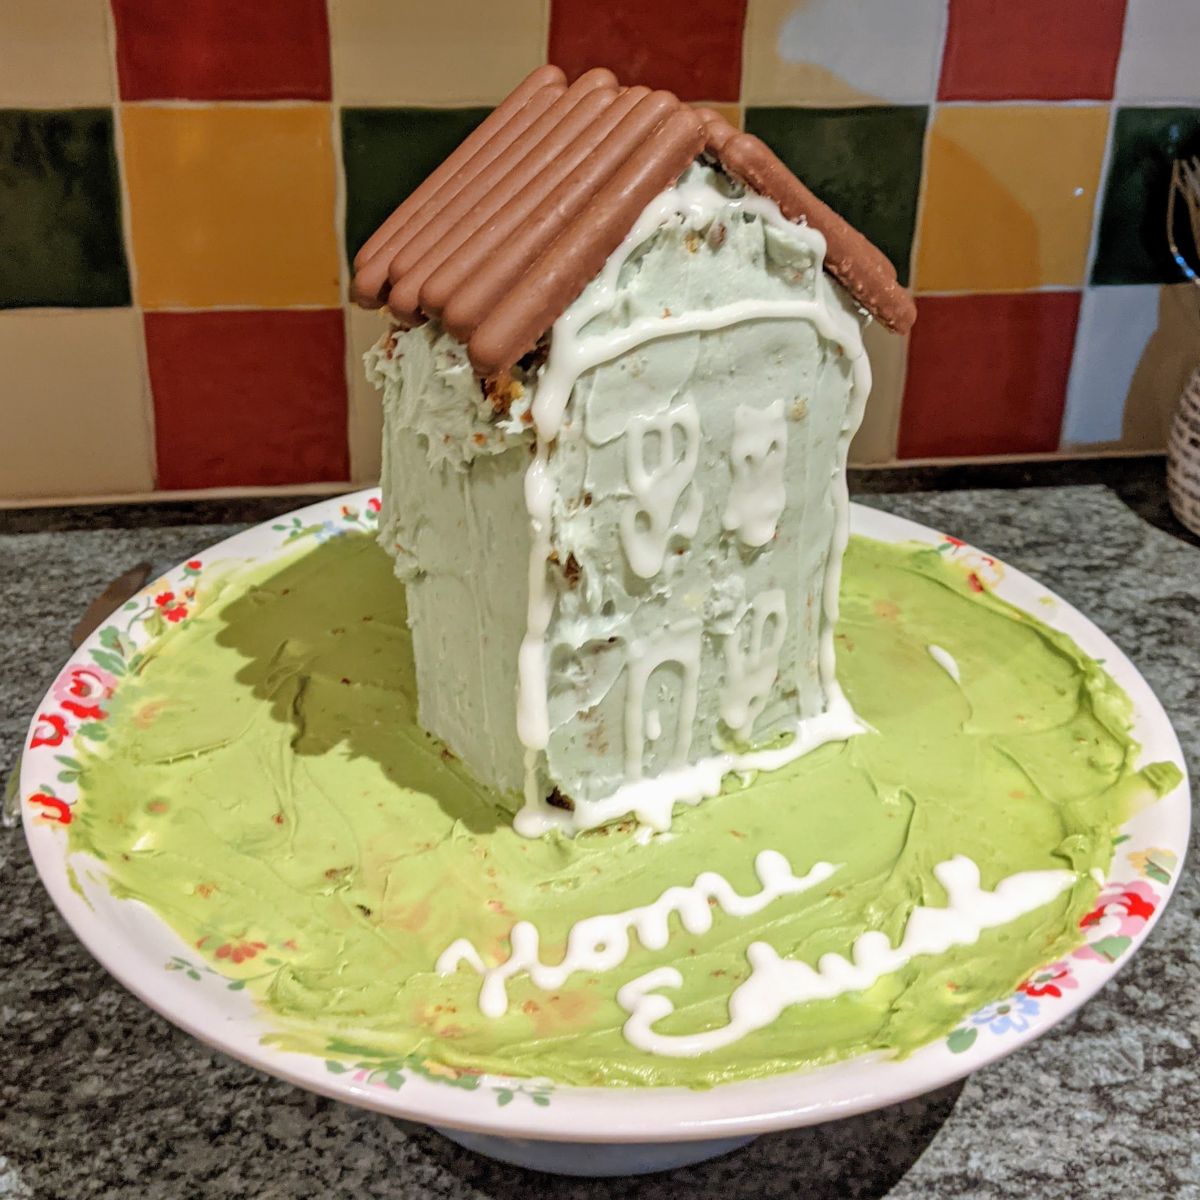 Robert's apple-spice 'house' cake from the OU's 2021 Bake Your Research competition.